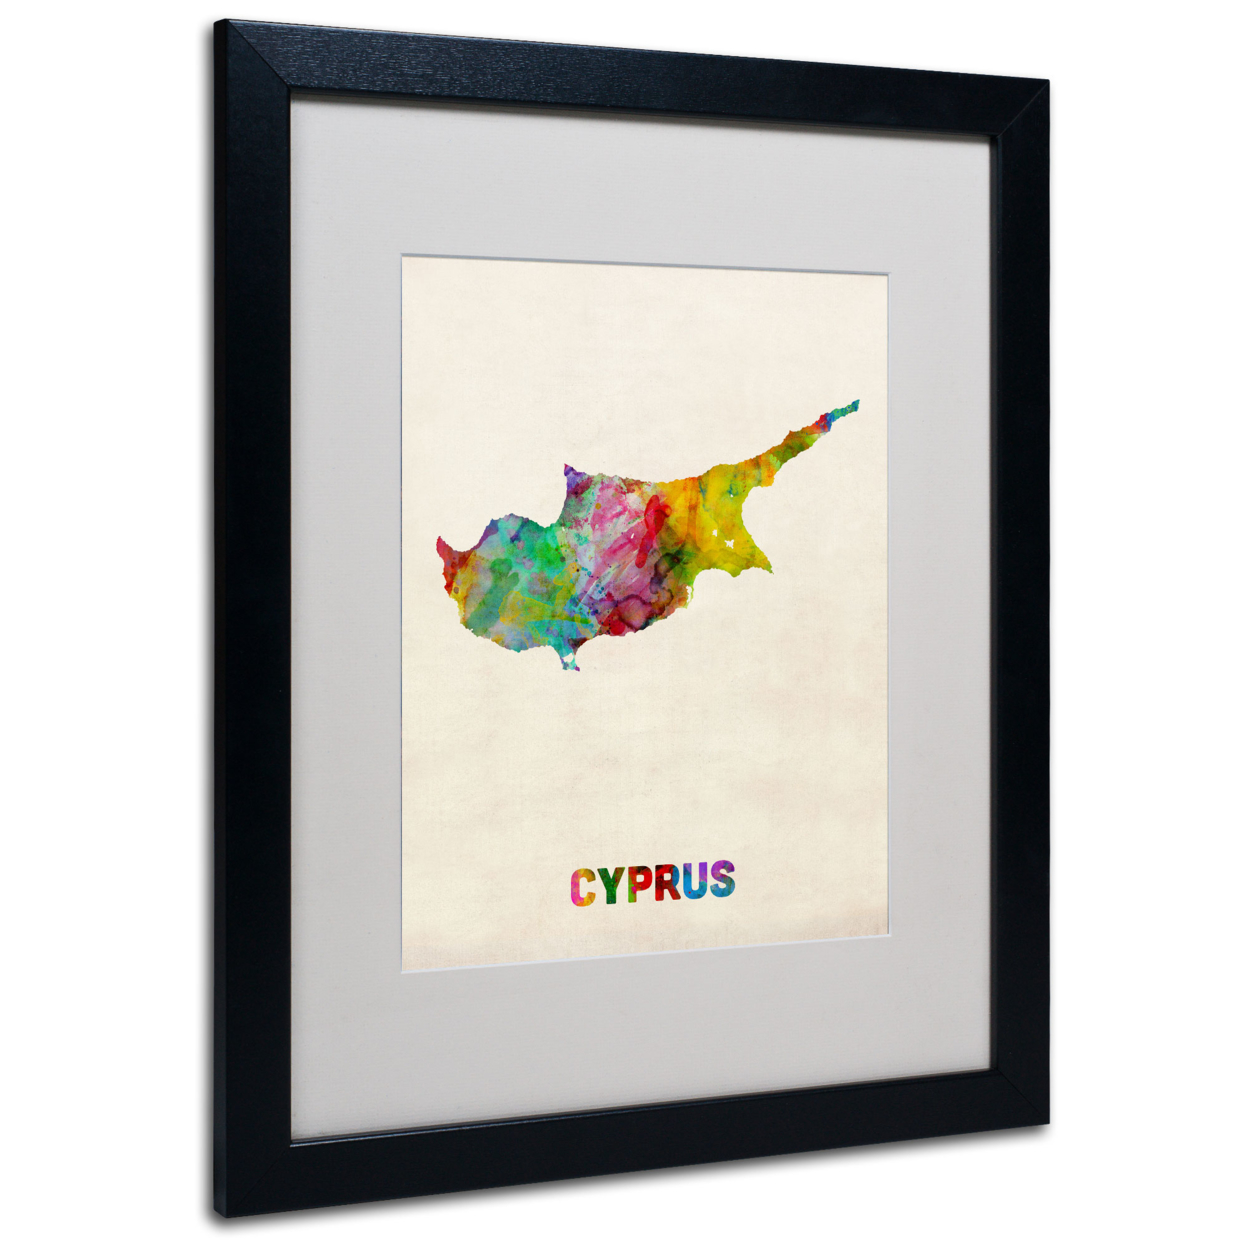 Michael Tompsett 'Cyprus Watercolor Map' Black Wooden Framed Art 18 X 22 Inches